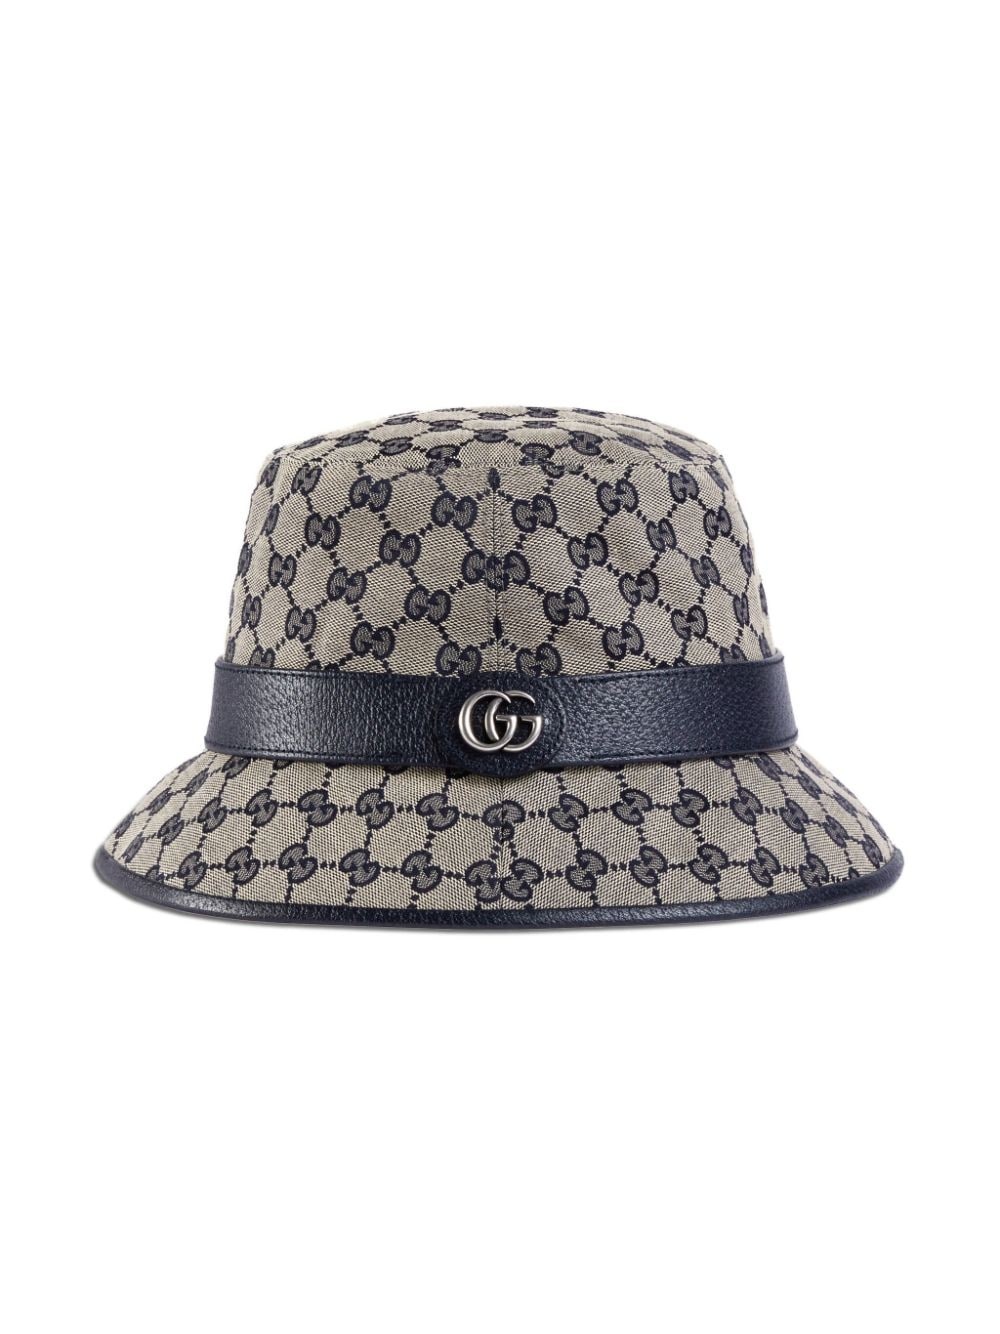 Gg fabric hat with double g - 2